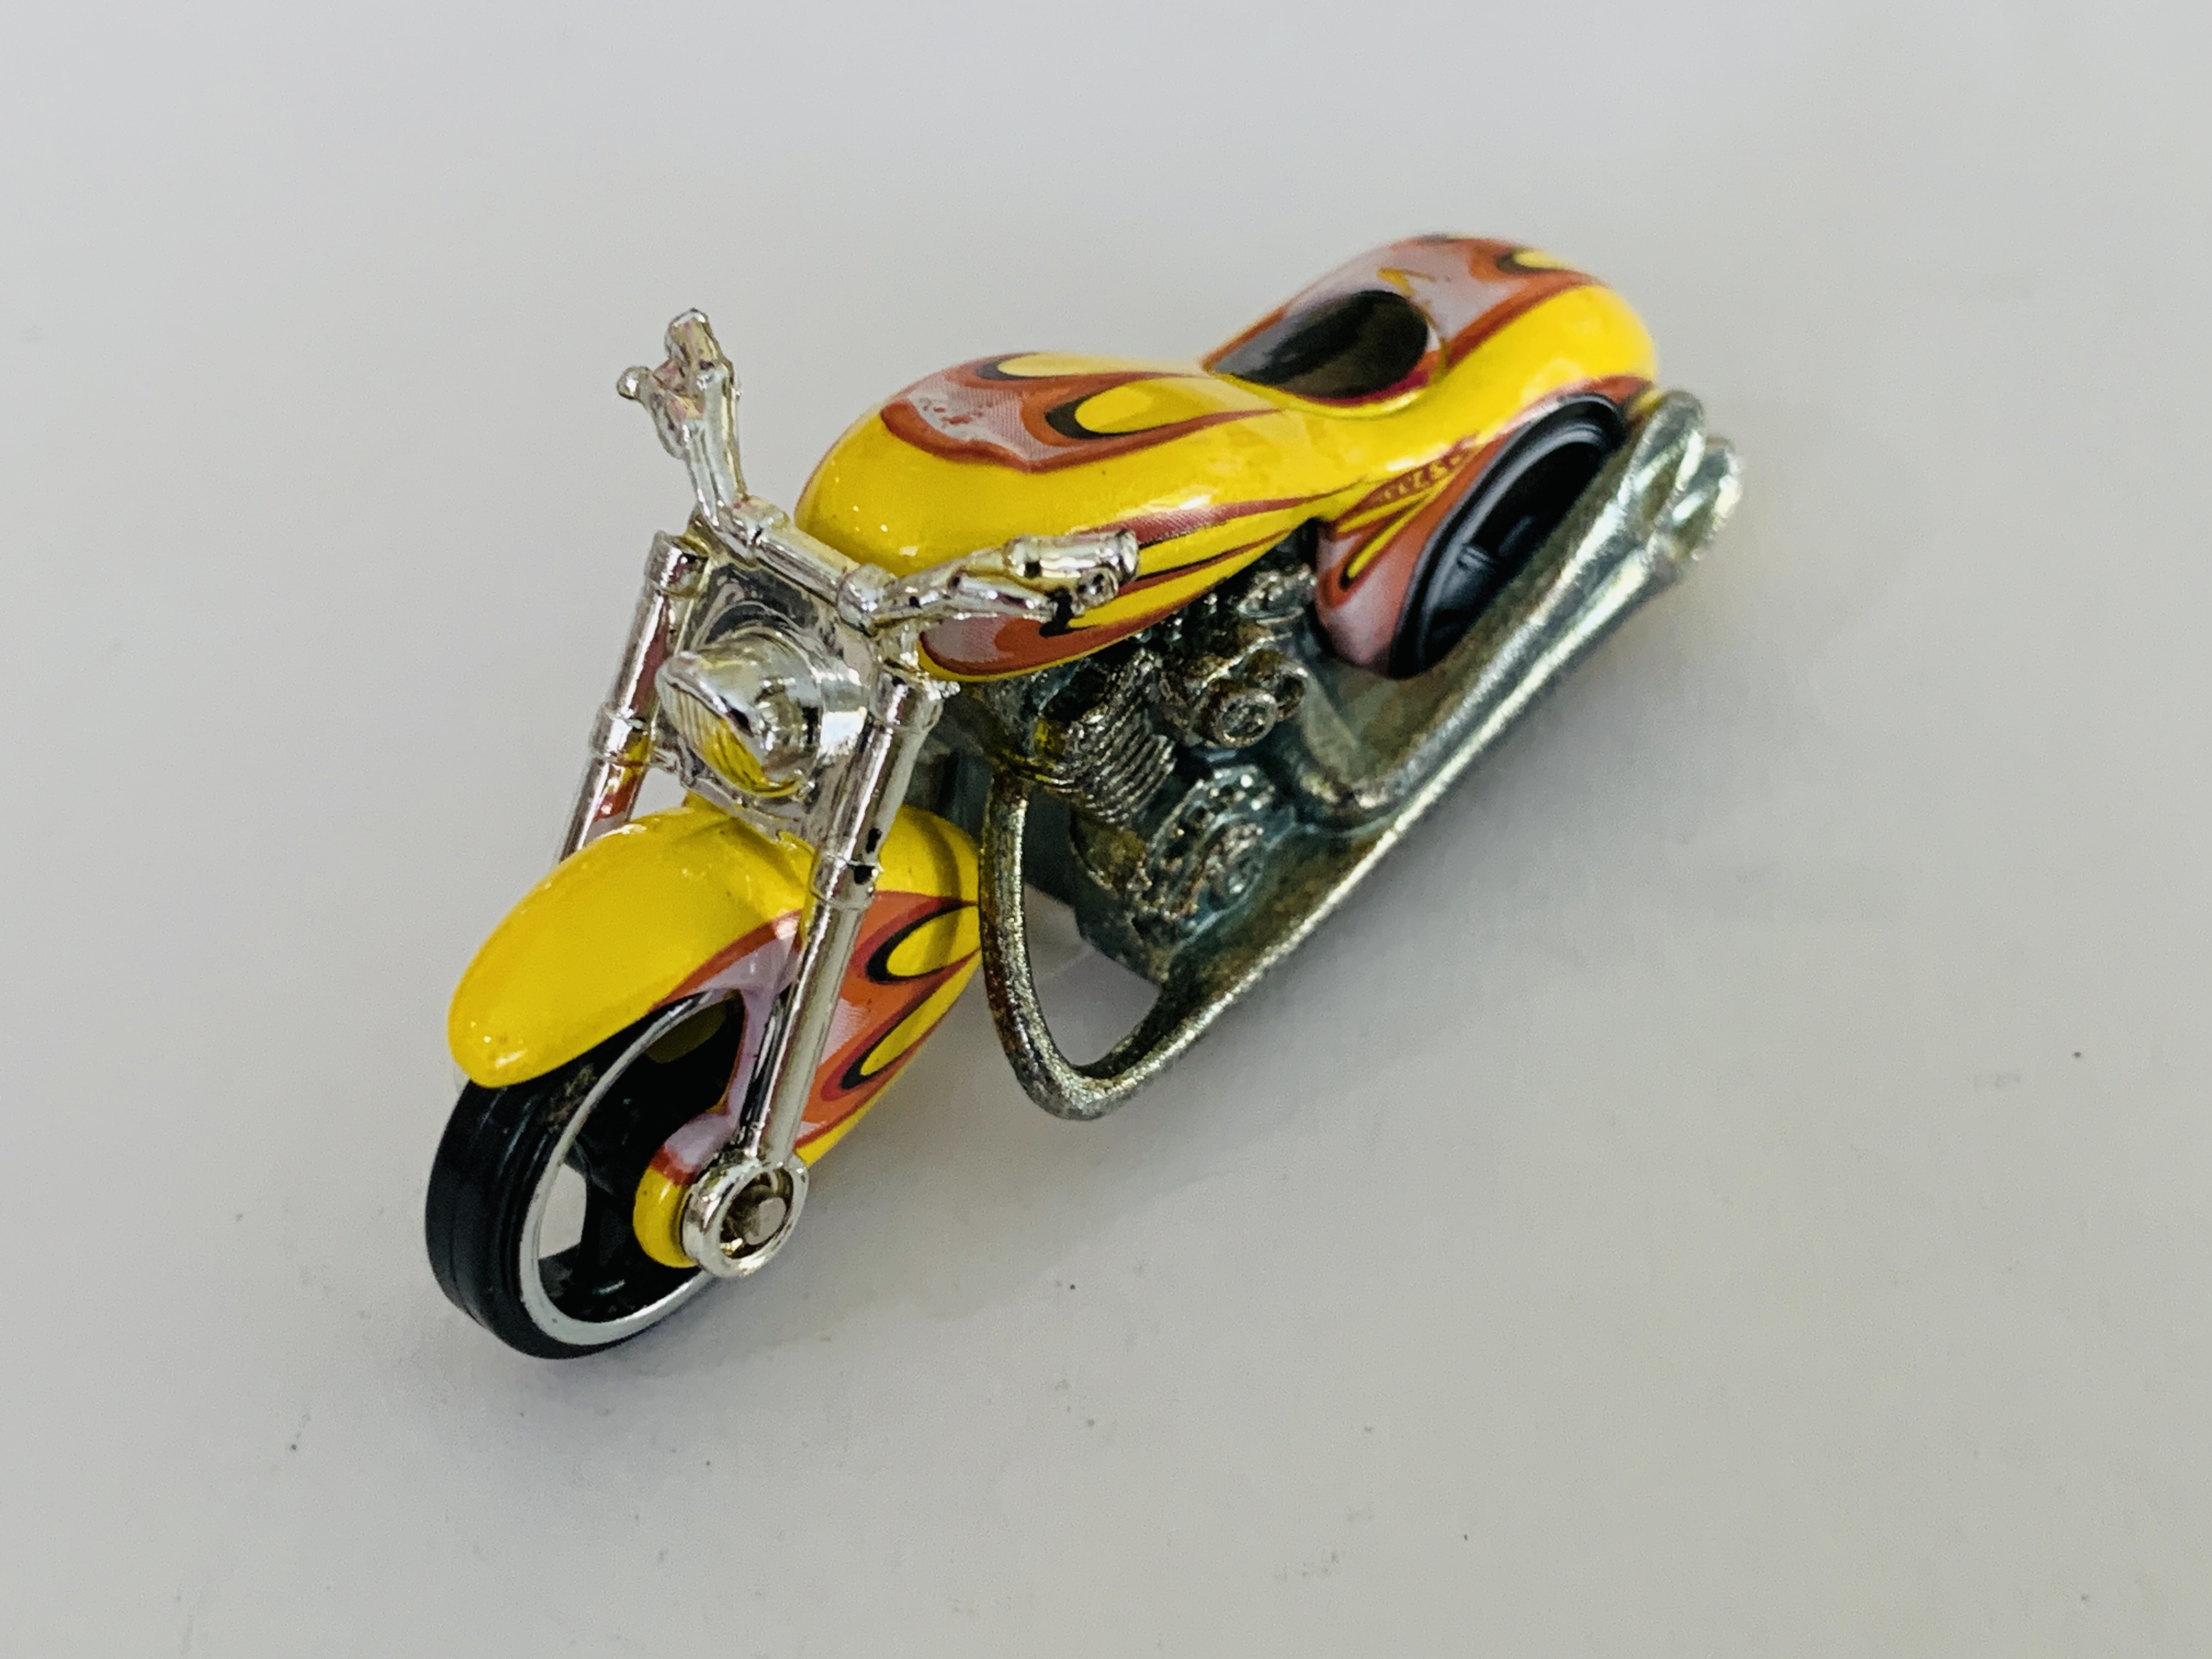 Hot Wheels Hall Of Fame Top 10 Scorchin' Scooter